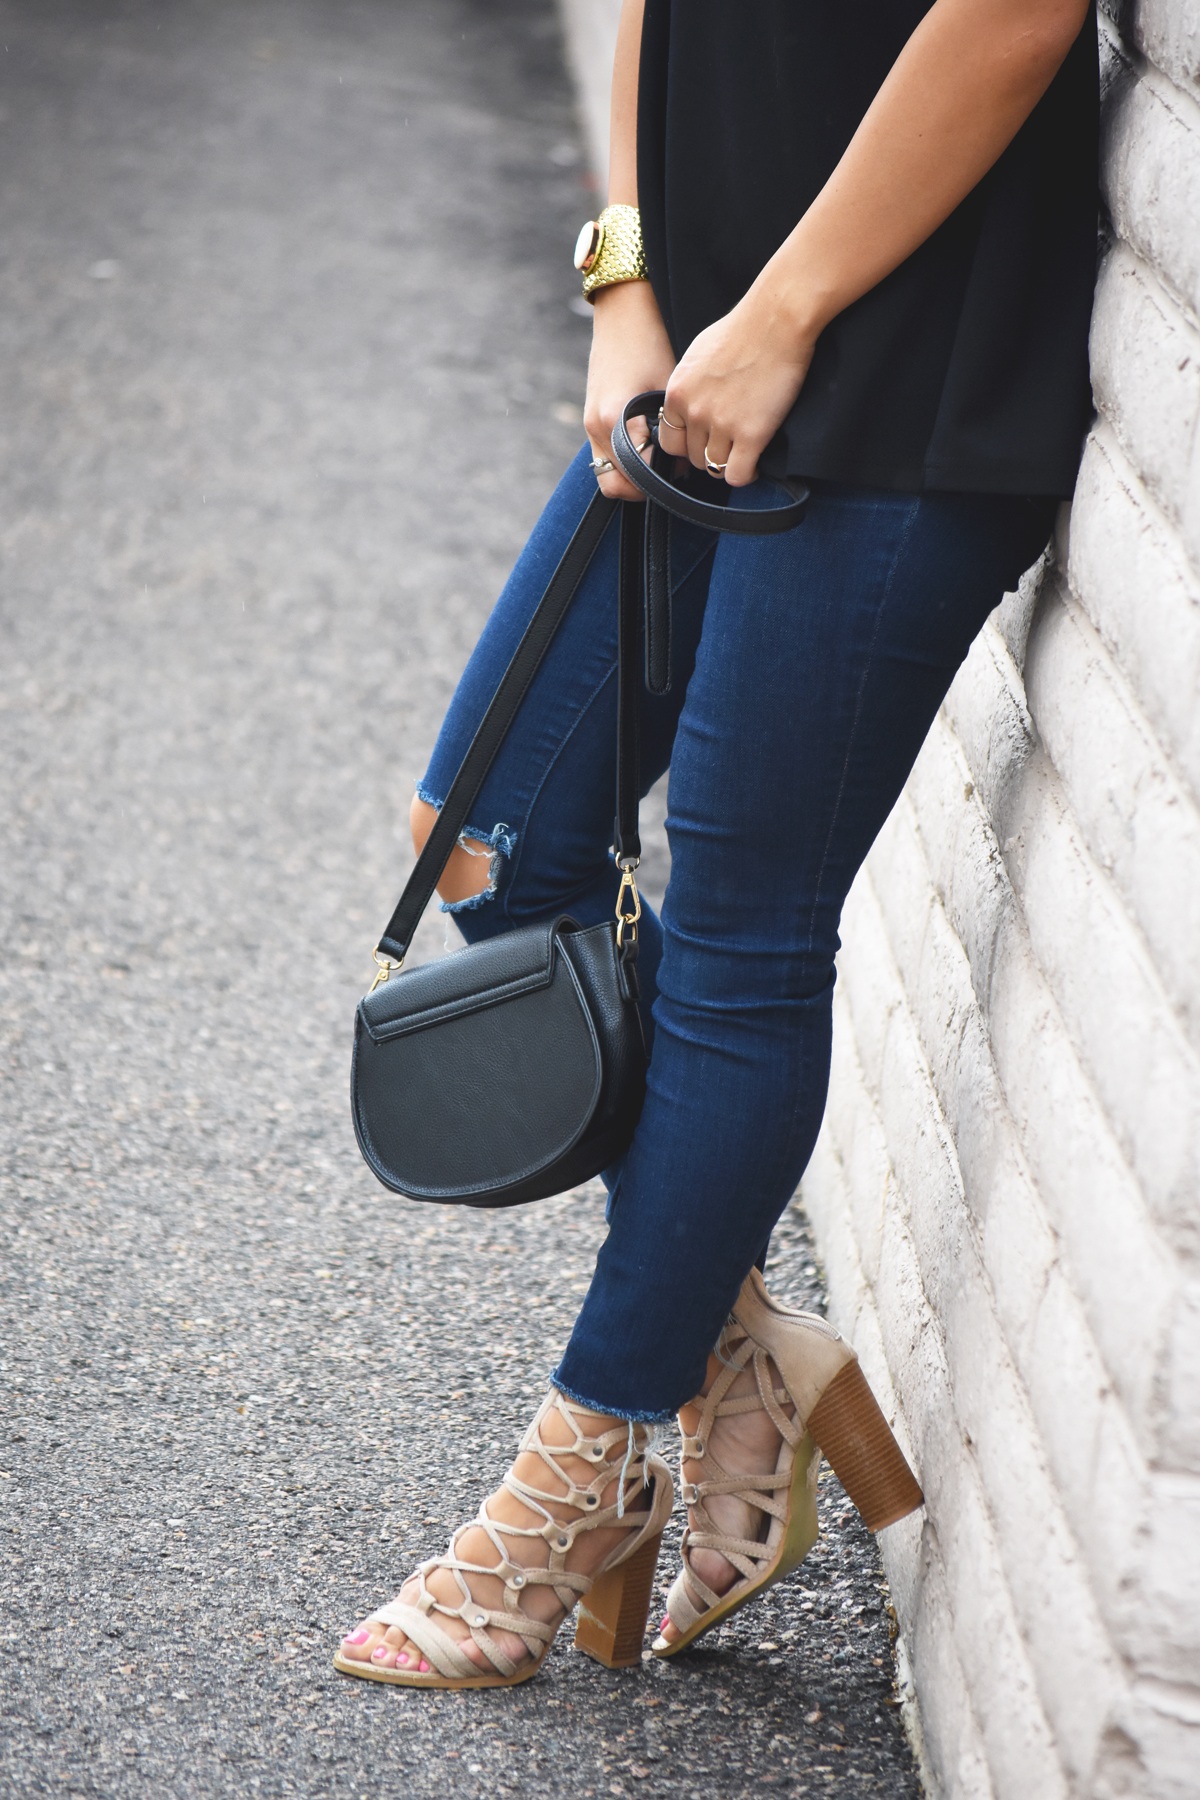 Lace up sandals and madewell jeans